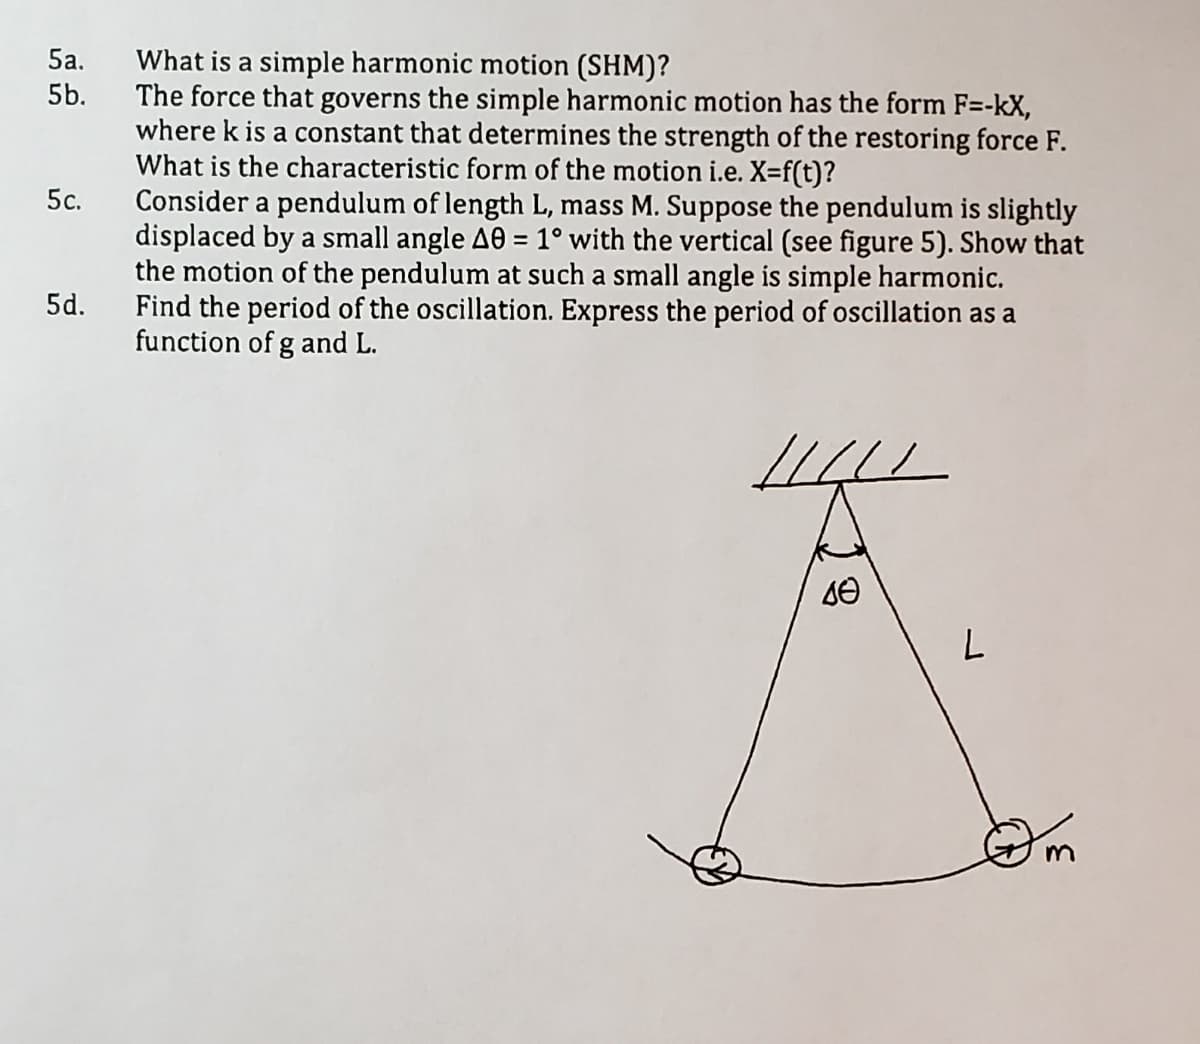 5a.
What is a simple harmonic motion (SHM)?
The force that governs the simple harmonic motion has the form F=-kX,
where k is a constant that determines the strength of the restoring force F.
What is the characteristic form of the motion i.e. X=f(t)?
Consider a pendulum of length L, mass M. Suppose the pendulum is slightly
displaced by a small angle A0 = 1° with the vertical (see figure 5). Show that
the motion of the pendulum at such a small angle is simple harmonic.
Find the period of the oscillation. Express the period of oscillation as a
function of g and L.
5b.
5c.
5d.
